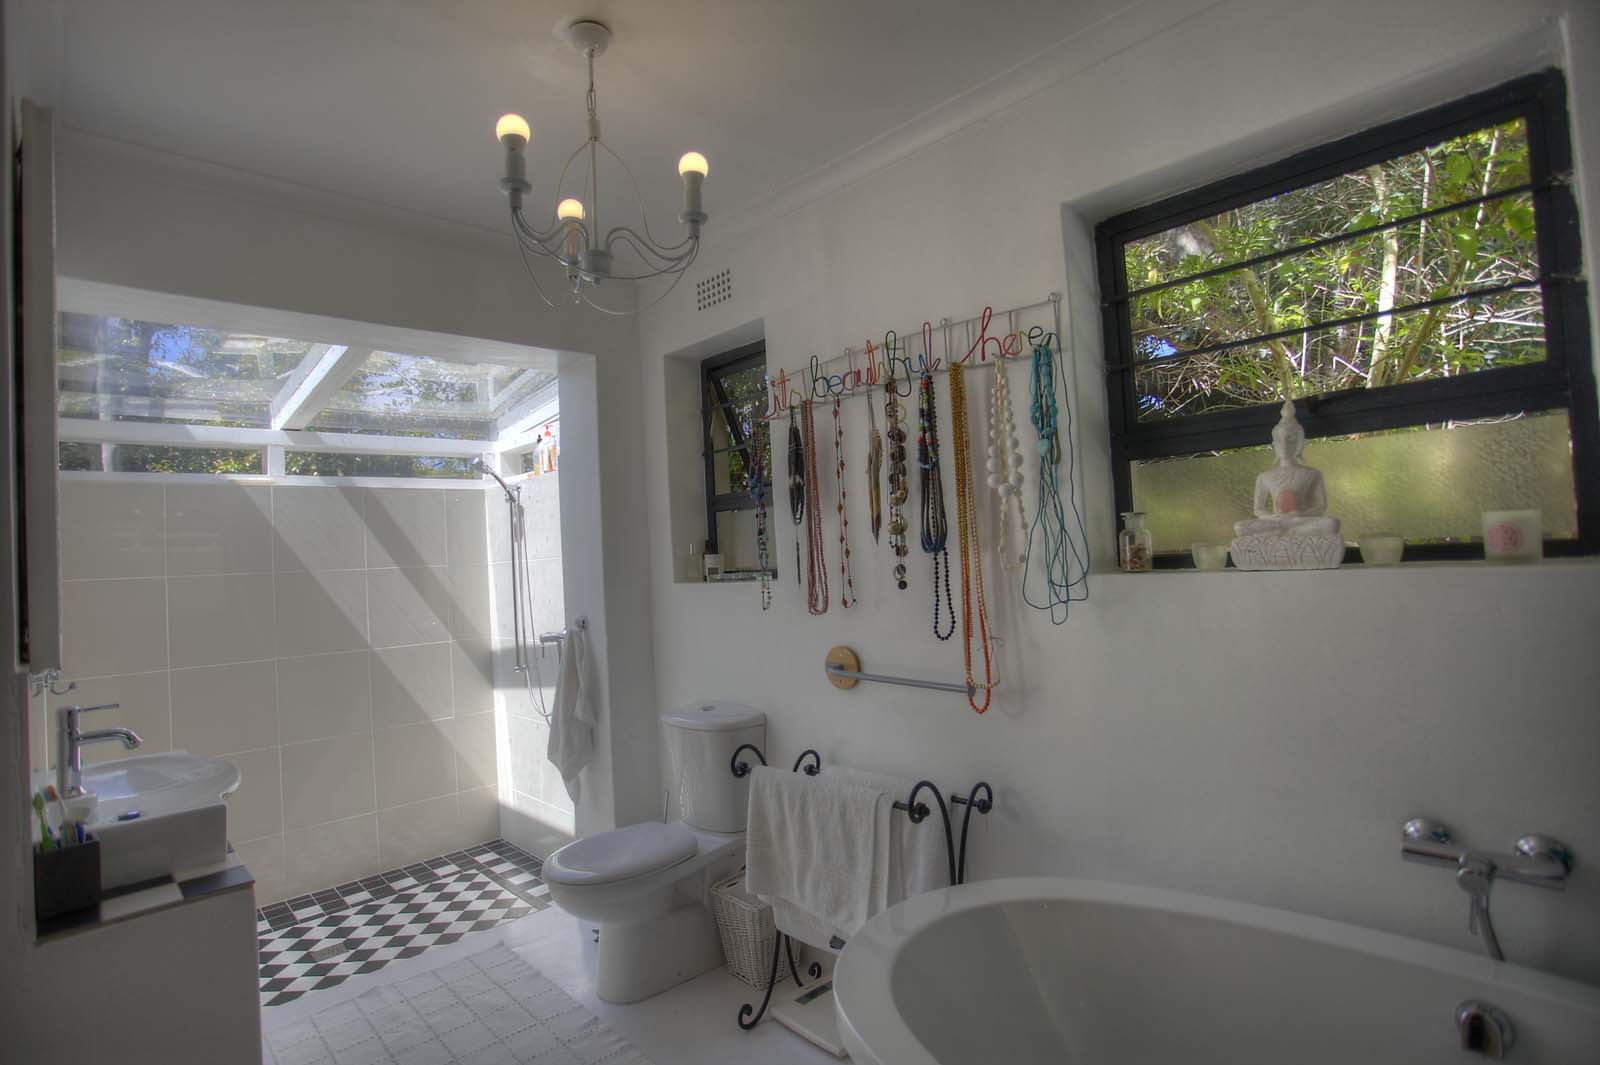 Photo 4 of Villa Robertson accommodation in Constantia, Cape Town with 4 bedrooms and 3 bathrooms